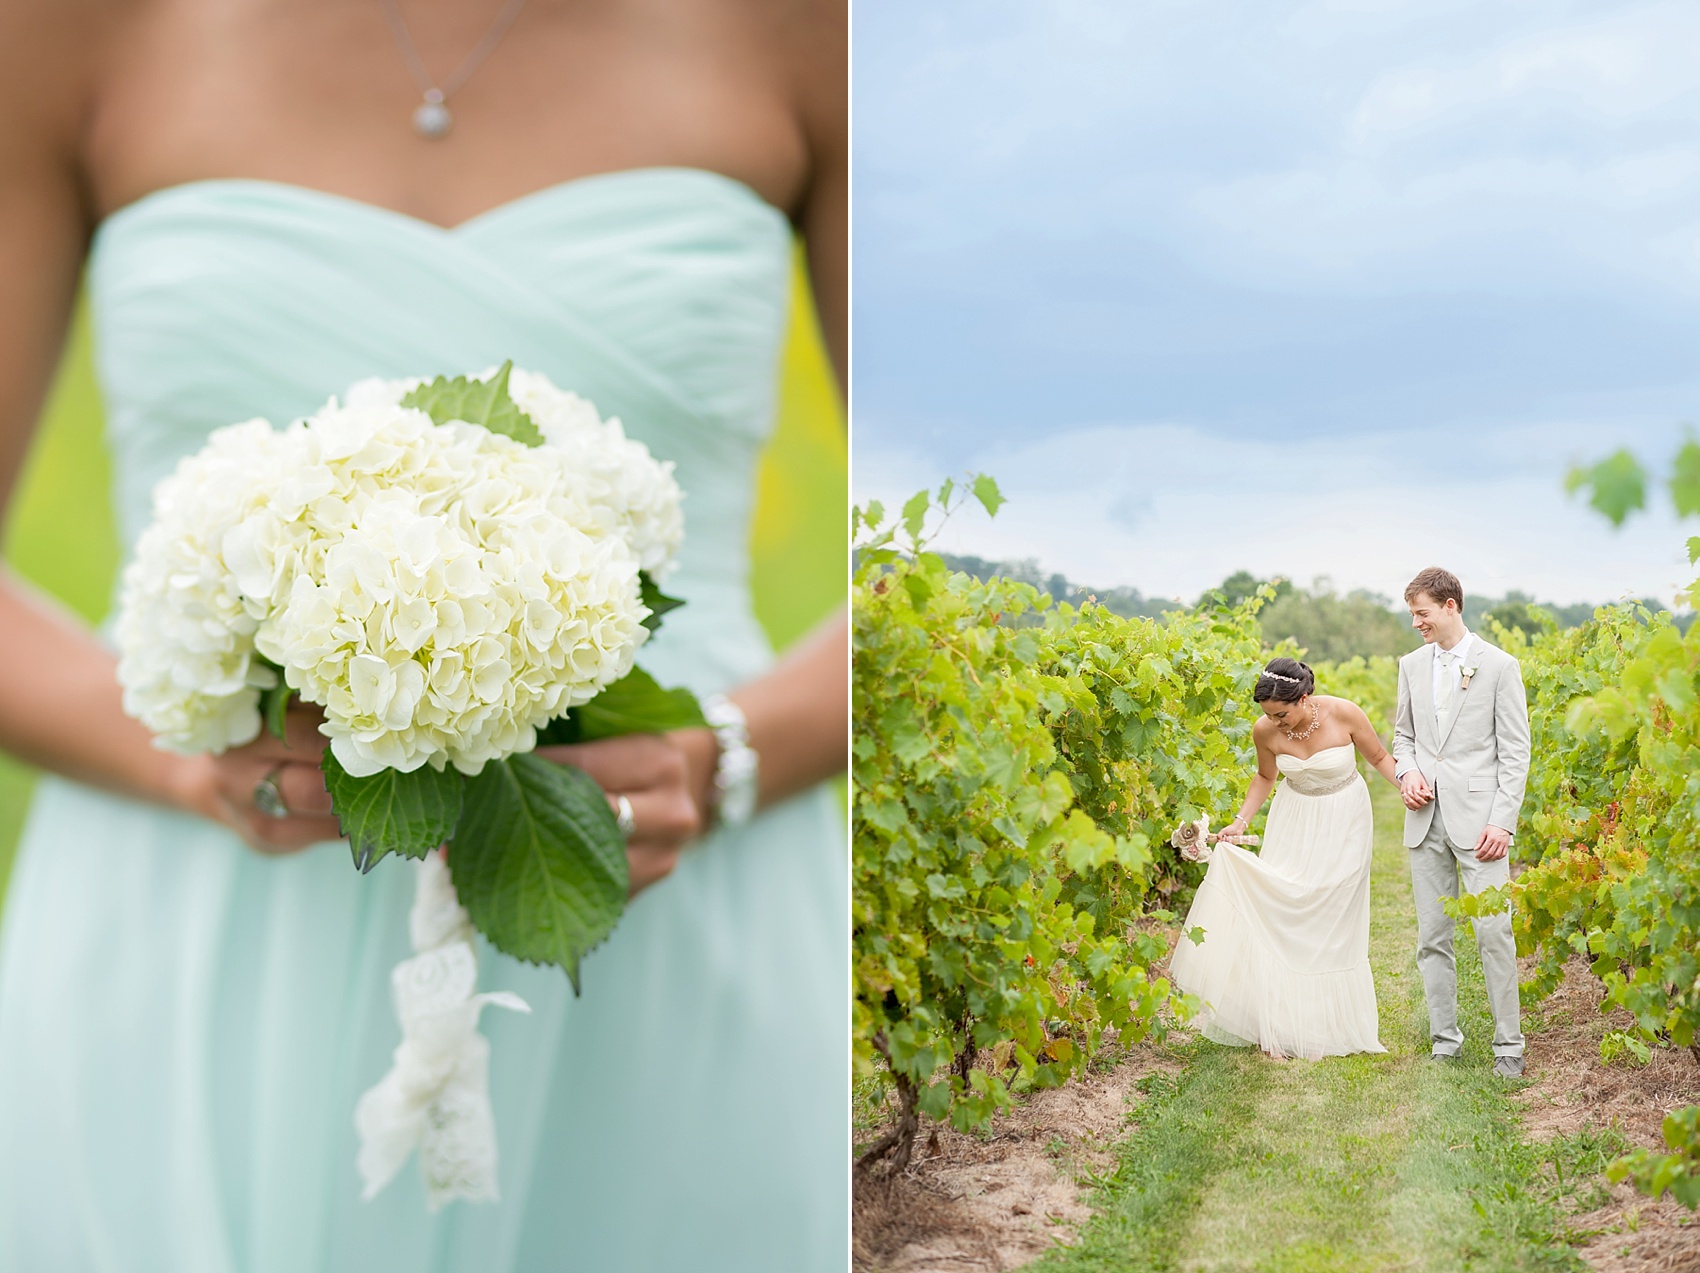 Hydrangea bouquets and mint dresses for a summer vineyard wedding at Hopewell Valley Vineyards. Photos by New Jersey wedding photographer, Mikkel Paige Photography.